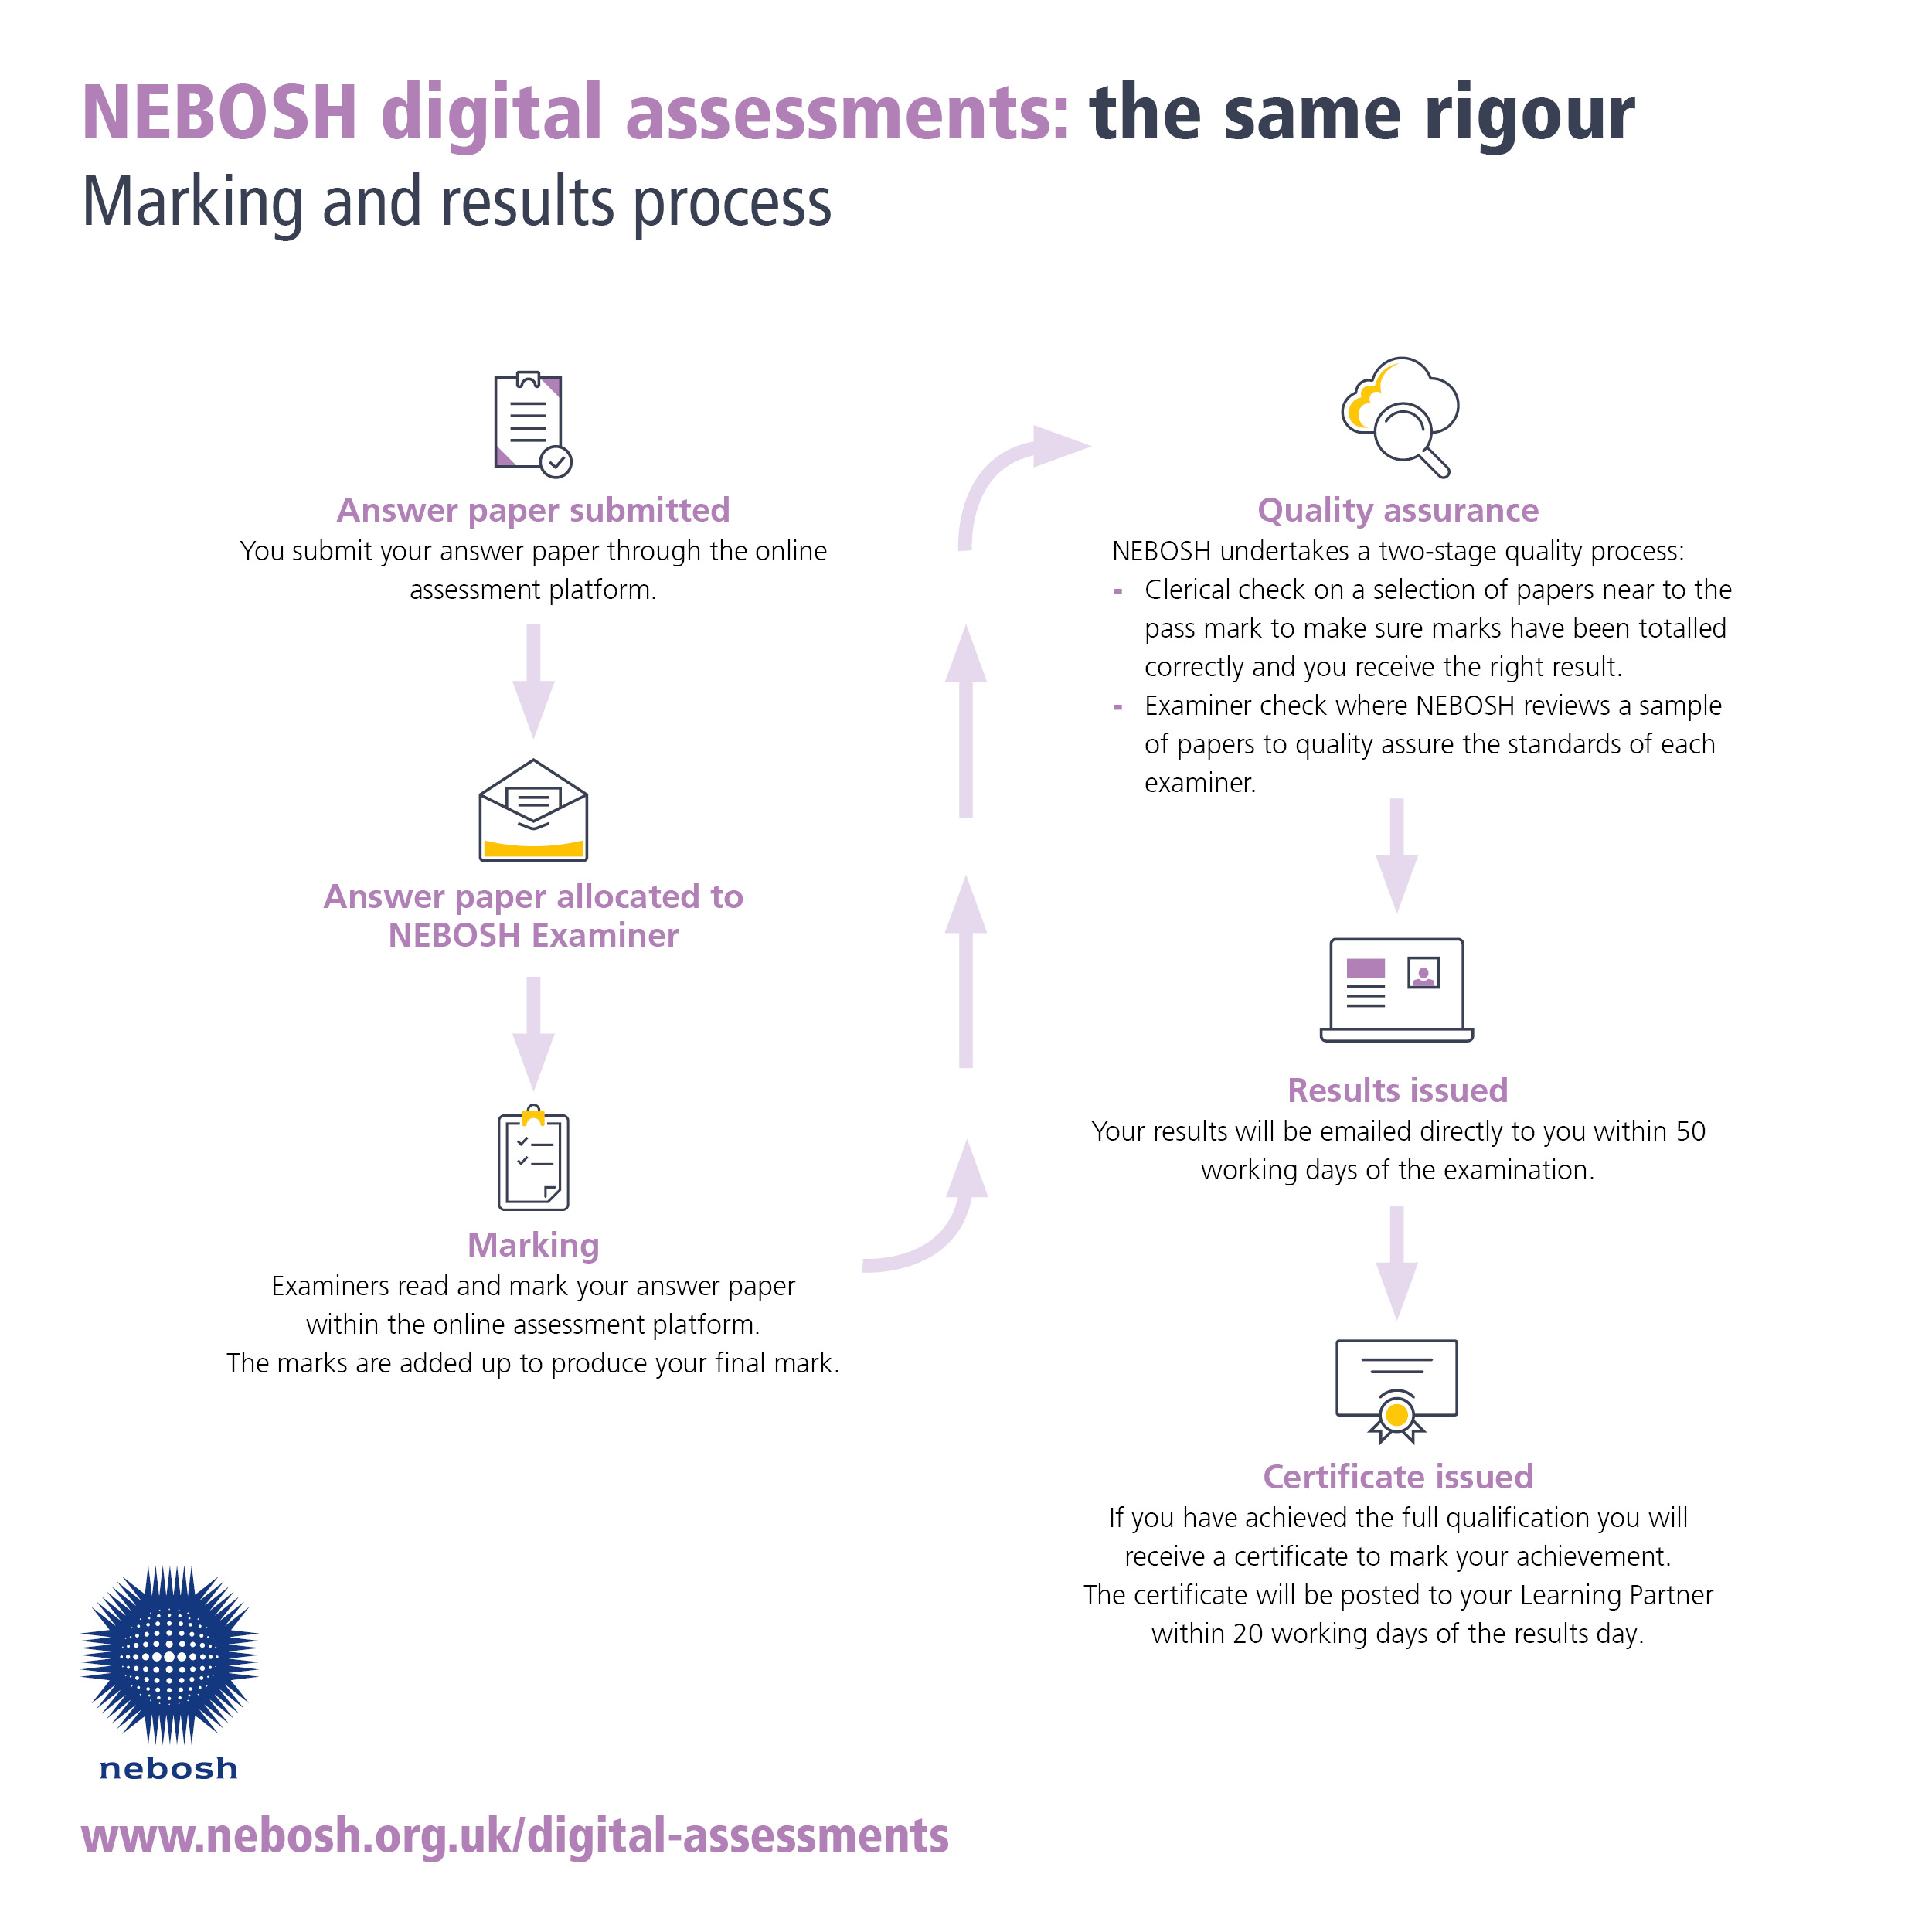 The marking process for NEBOSH digital assessments